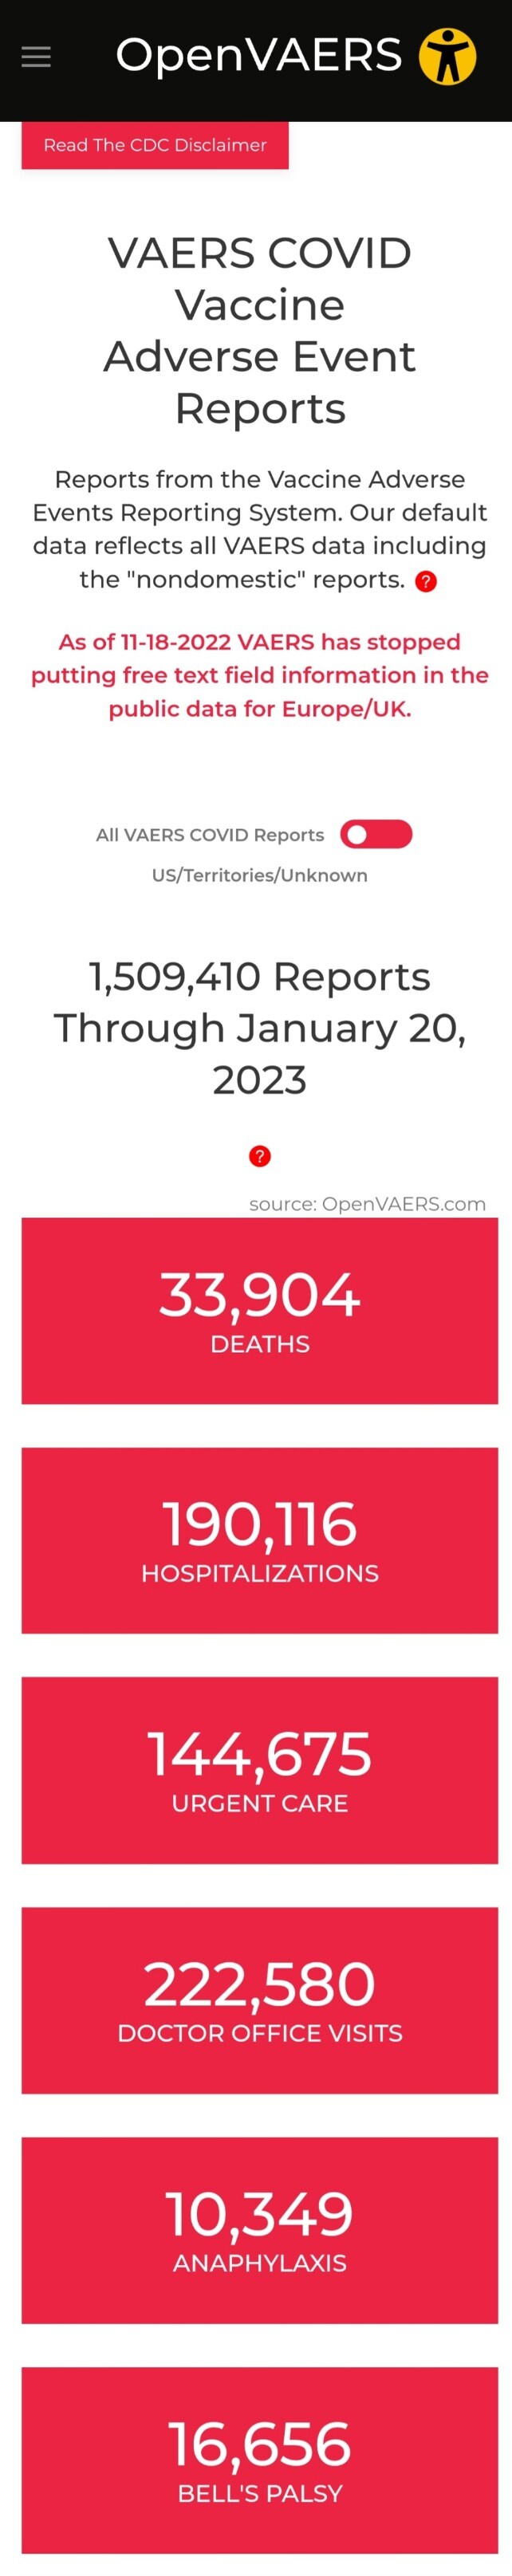 Vaccinations and current stats, lies, laws on covid - Page 3 F47985850a3ee6c1